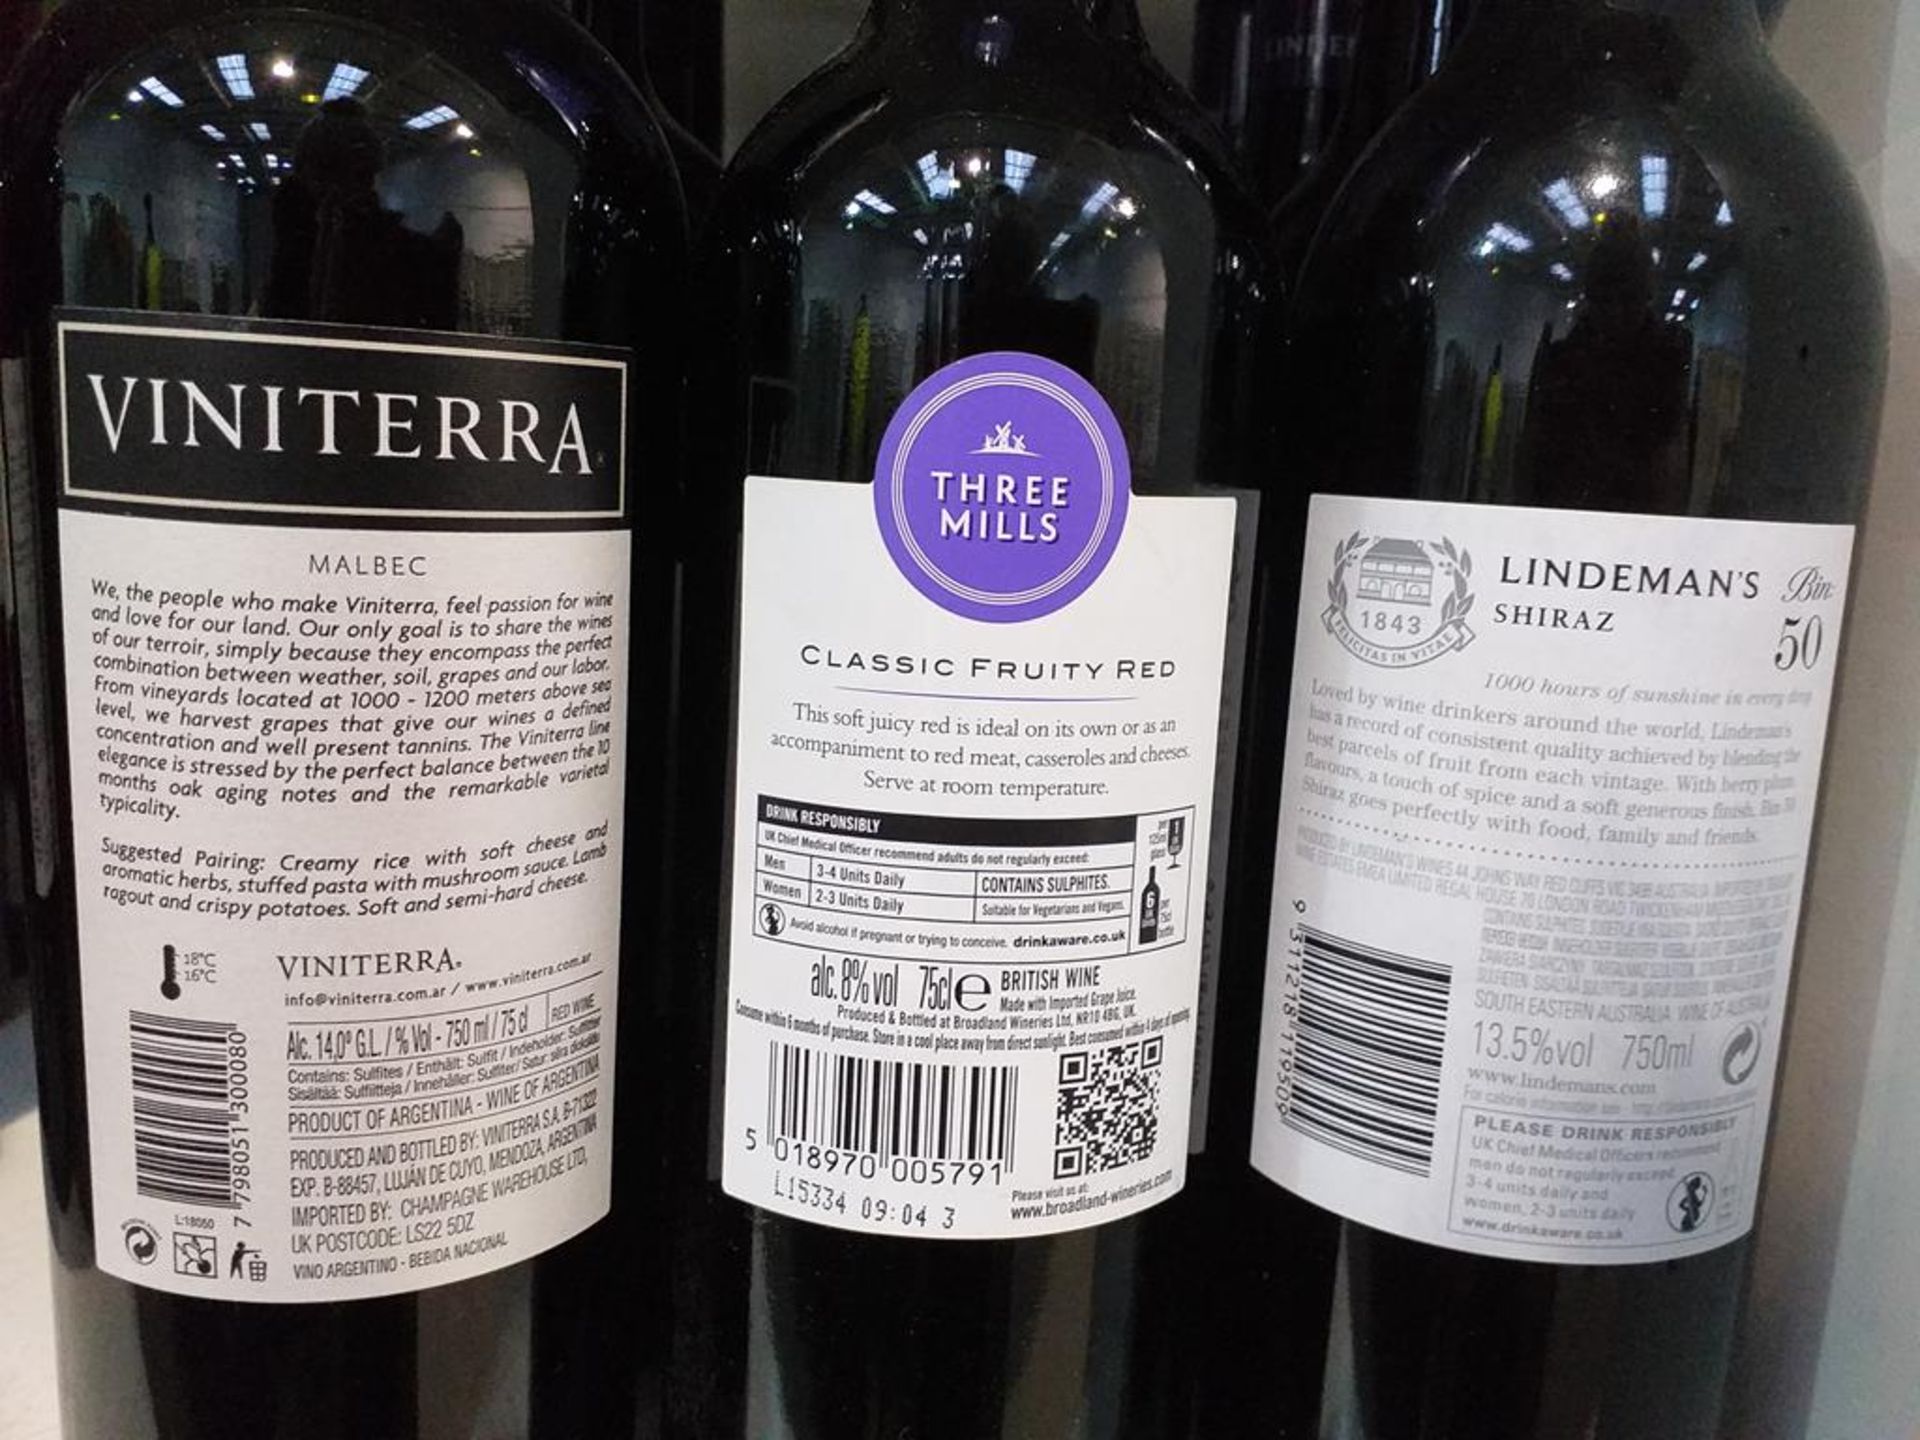 Four bottles of Viniterra Malbec 2016 Red Wine, two bottles of Three Mills Classic Fruity Red Wine a - Image 3 of 3